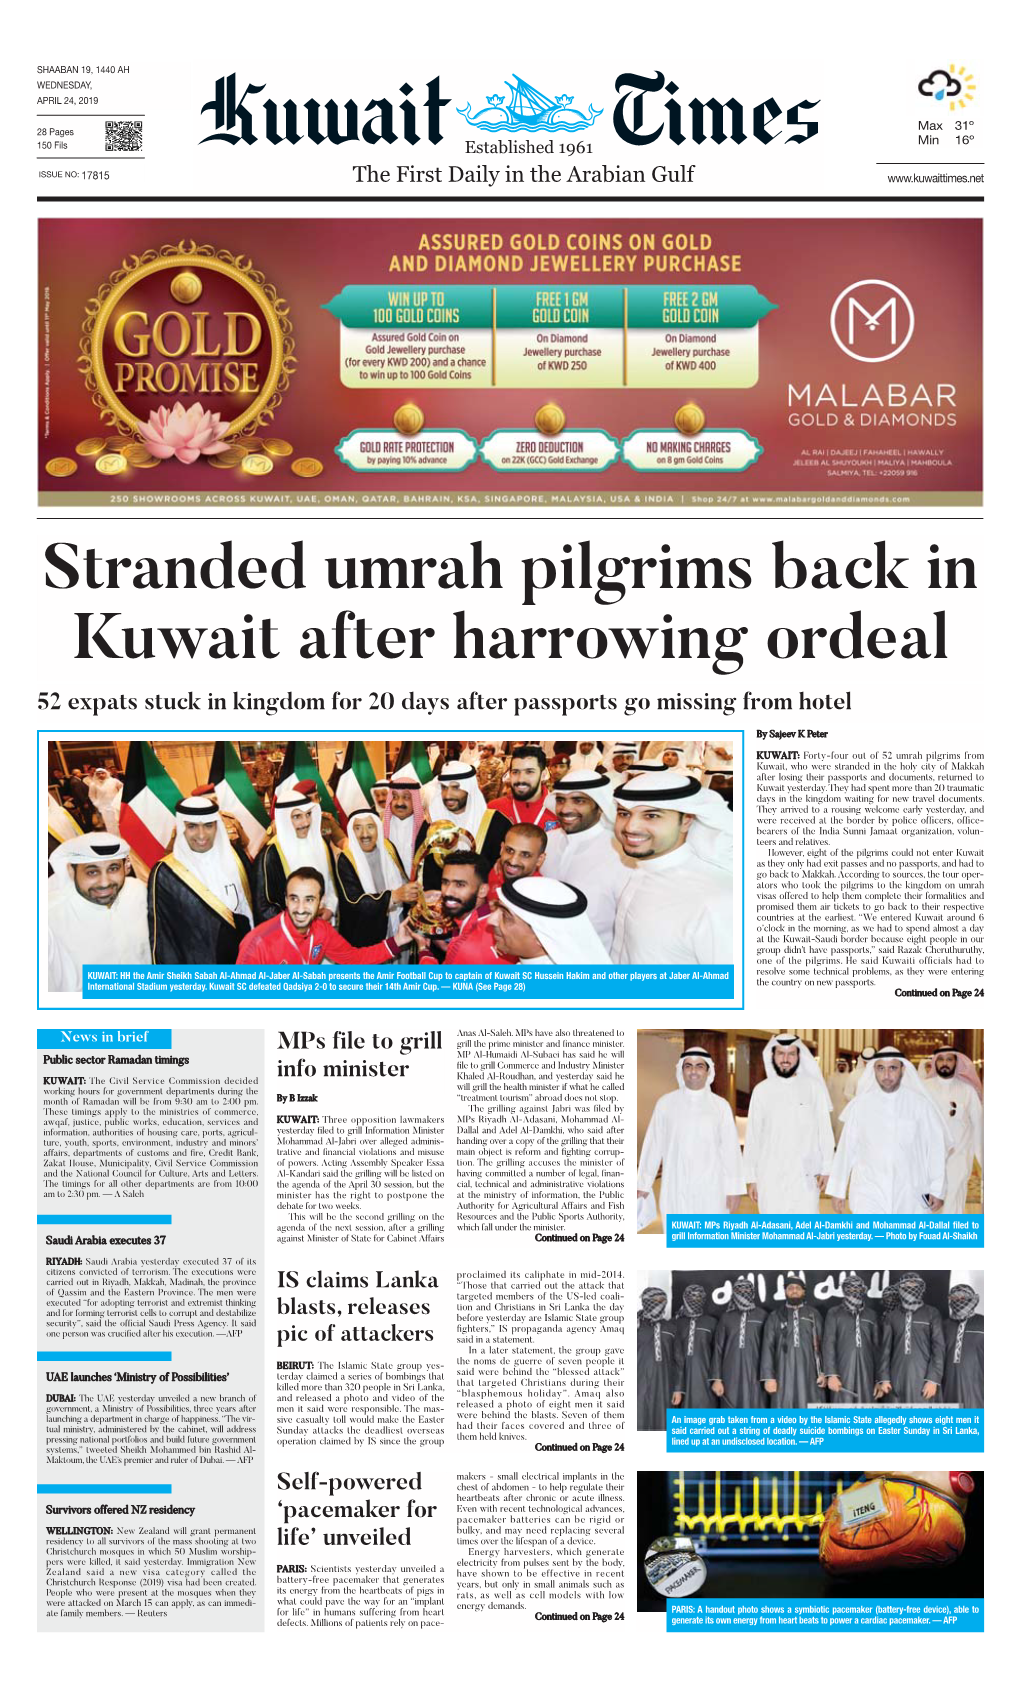 Stranded Umrah Pilgrims Back in Kuwait After Harrowing Ordeal 52 Expats Stuck in Kingdom for 20 Days After Passports Go Missing from Hotel